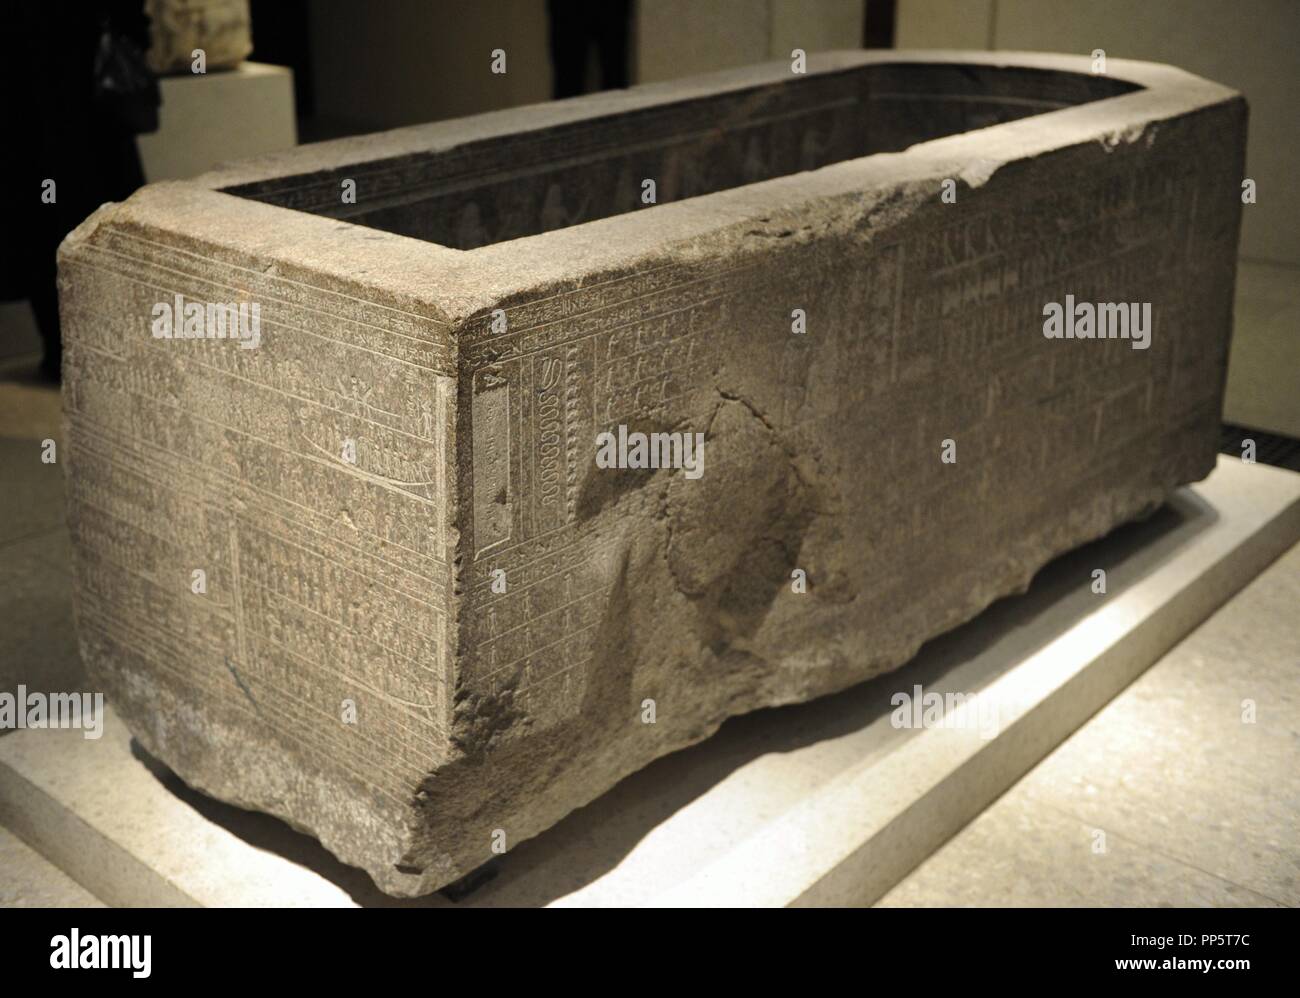 Djehapimu sarcophagus case. High Royal official. Late Period. 746-332 BC. Granite. Neues Museum. Berlin. Germany. Stock Photo